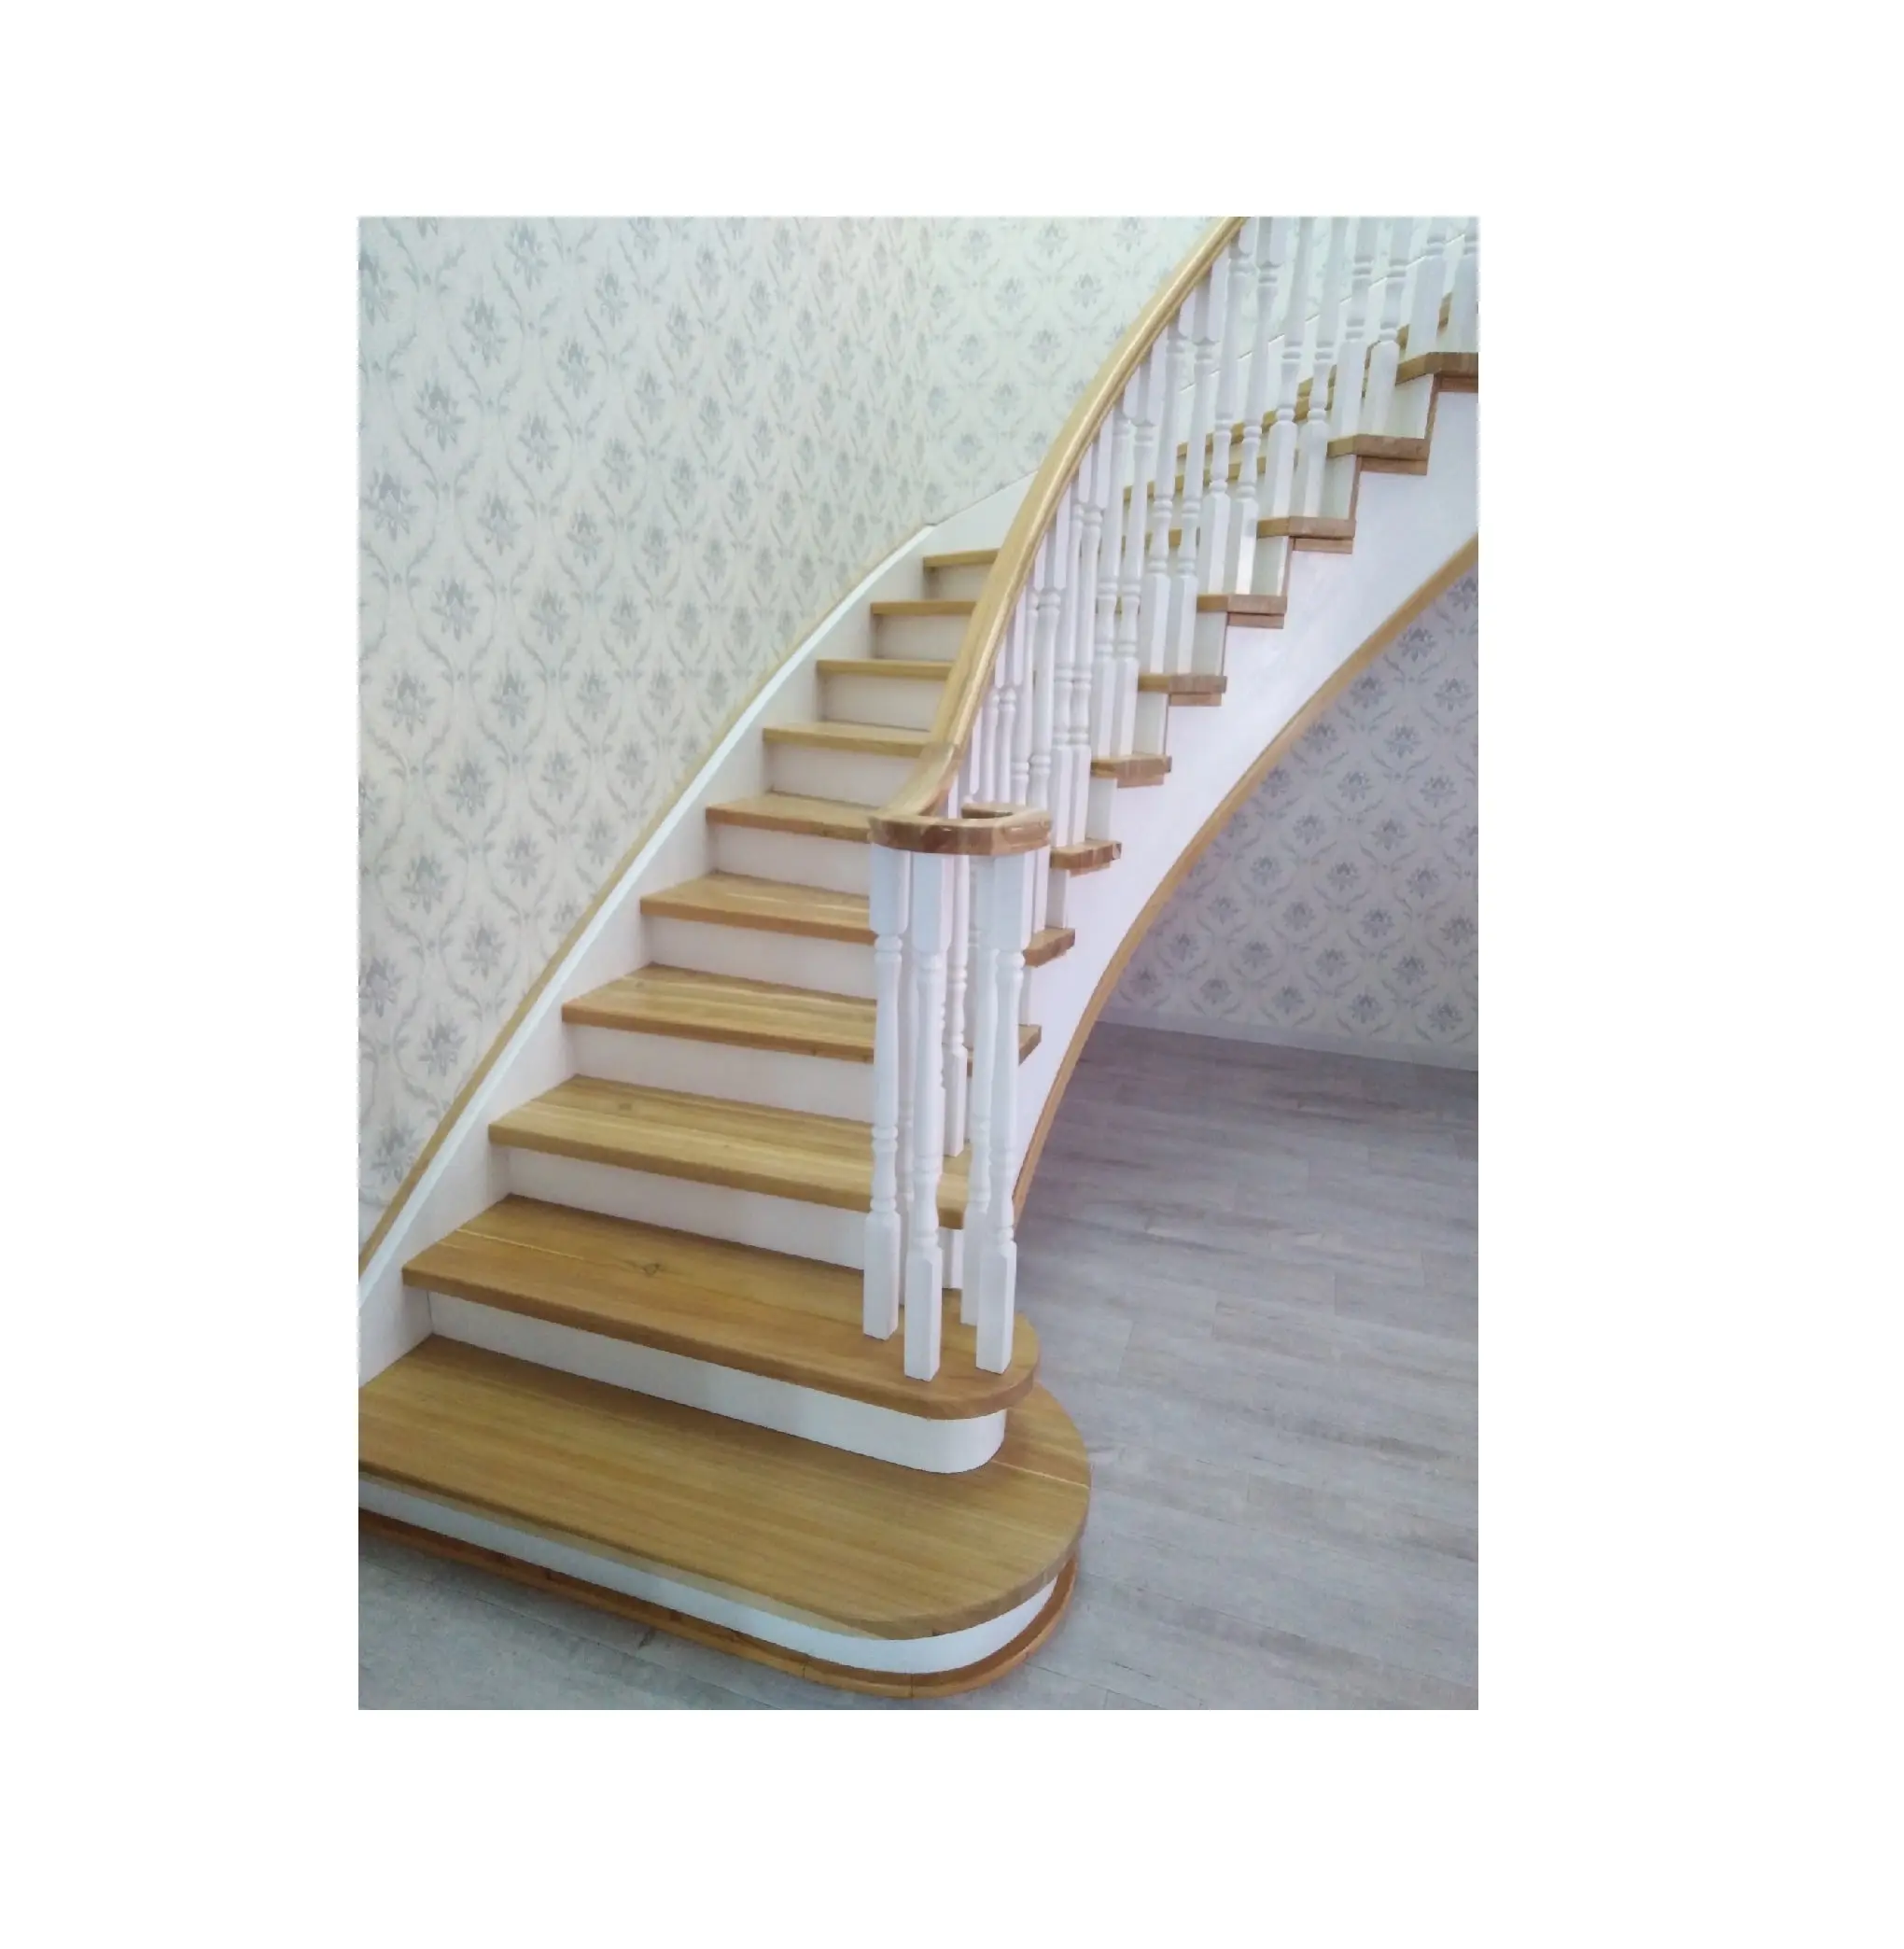 Custom Interfloor Stairs Spiral Interior Staircase For Attic Loft Wooden Stairs Indoor Solid Wood Staircase Stairway For Cottage